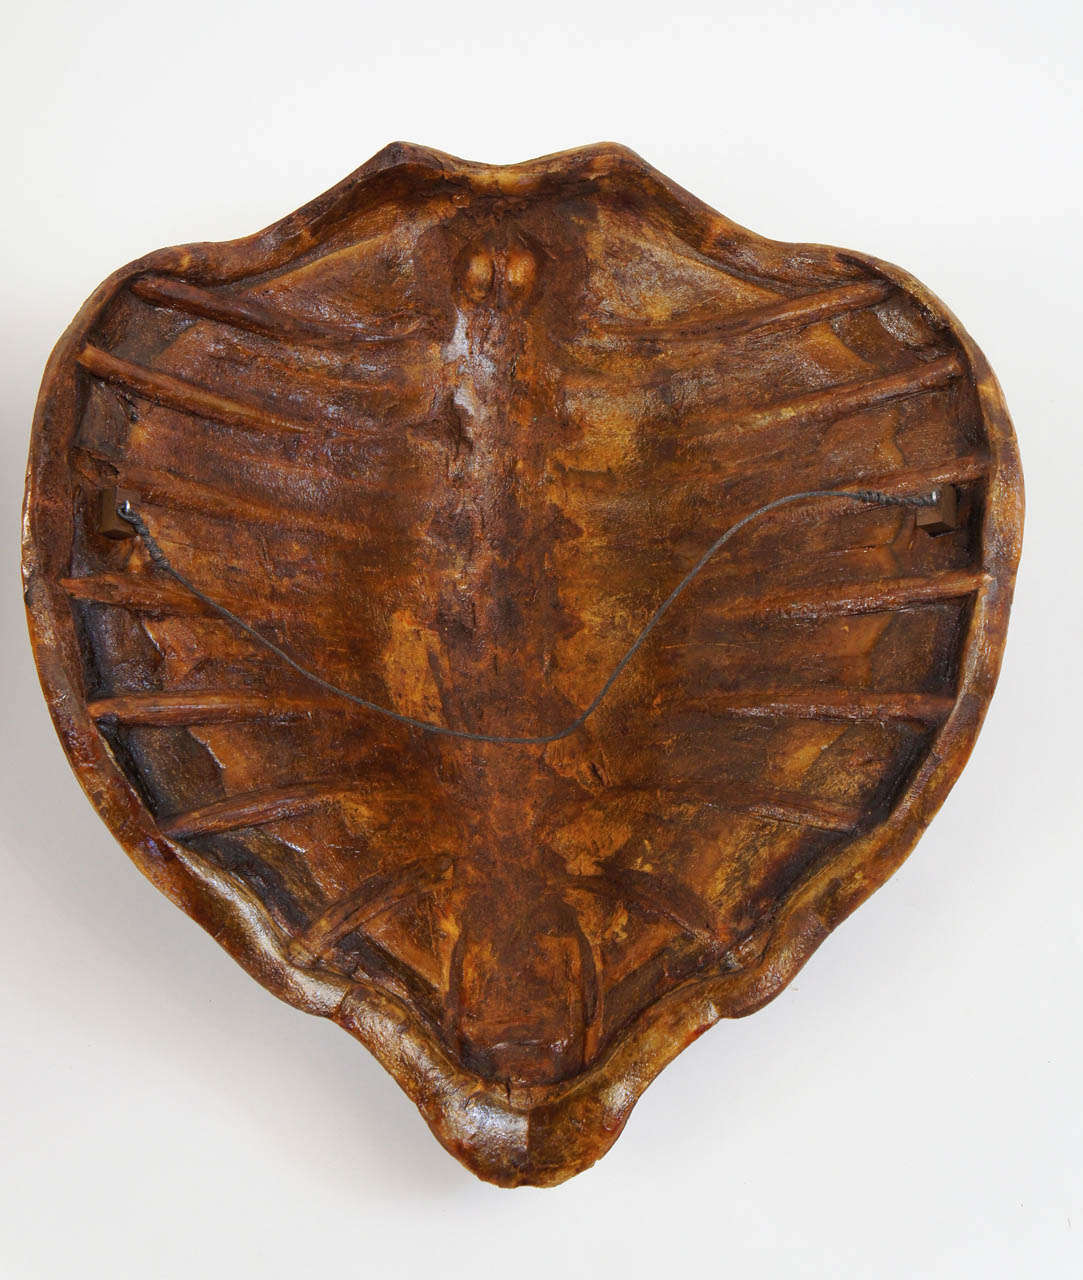 Two Large Marine Turtle Shells or Carapaces, 19th Century 6